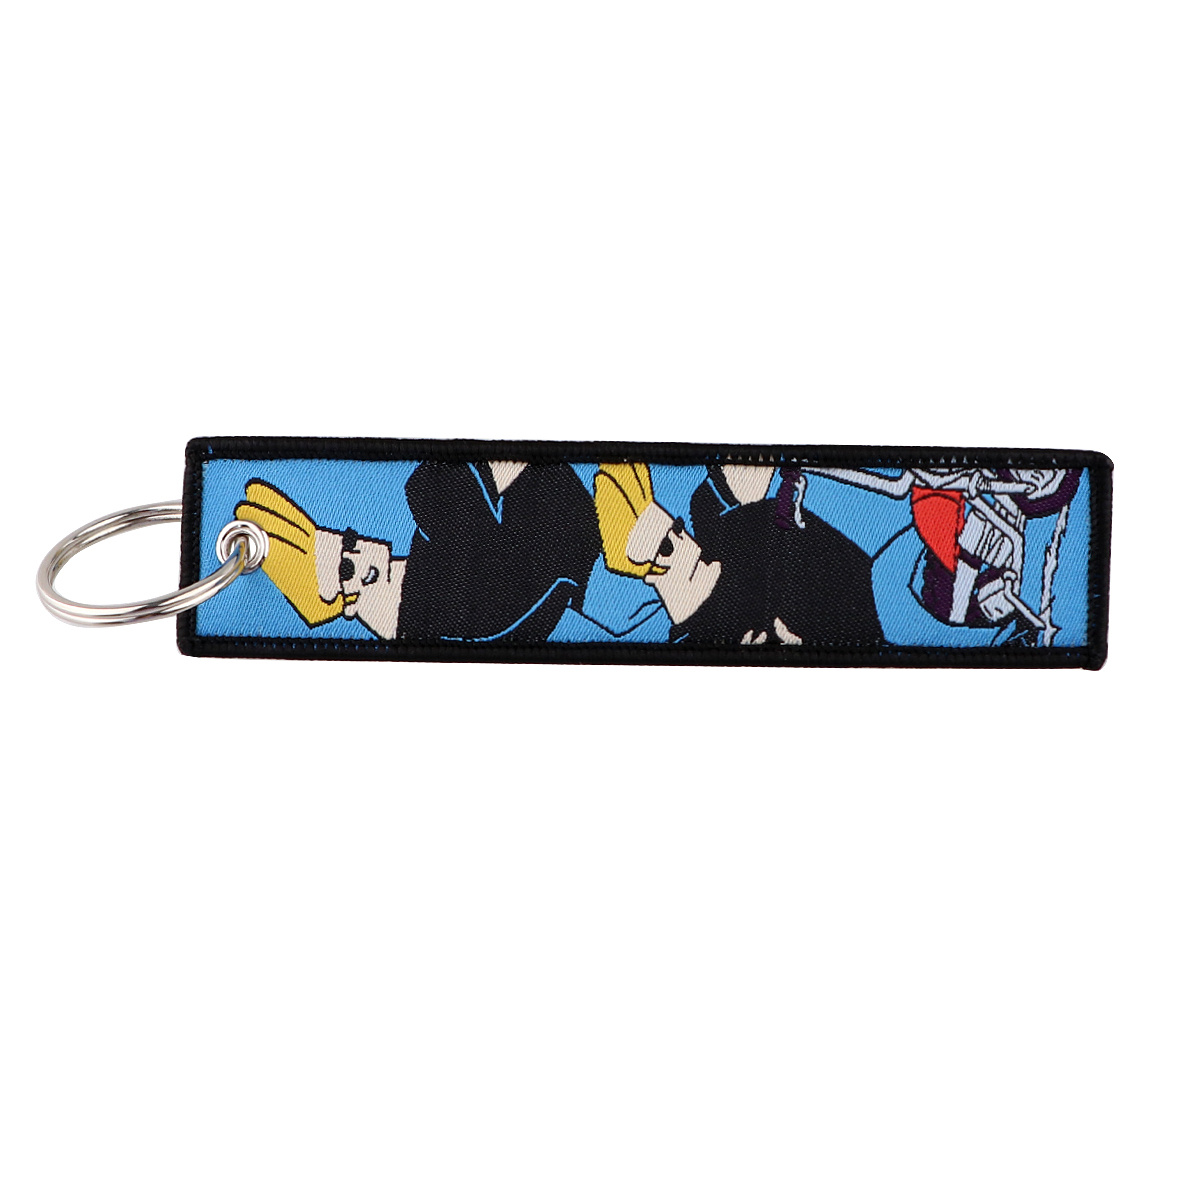 Japanese Anime Cool Embroidery Key Fobs Key Tag Motorcycles Cars